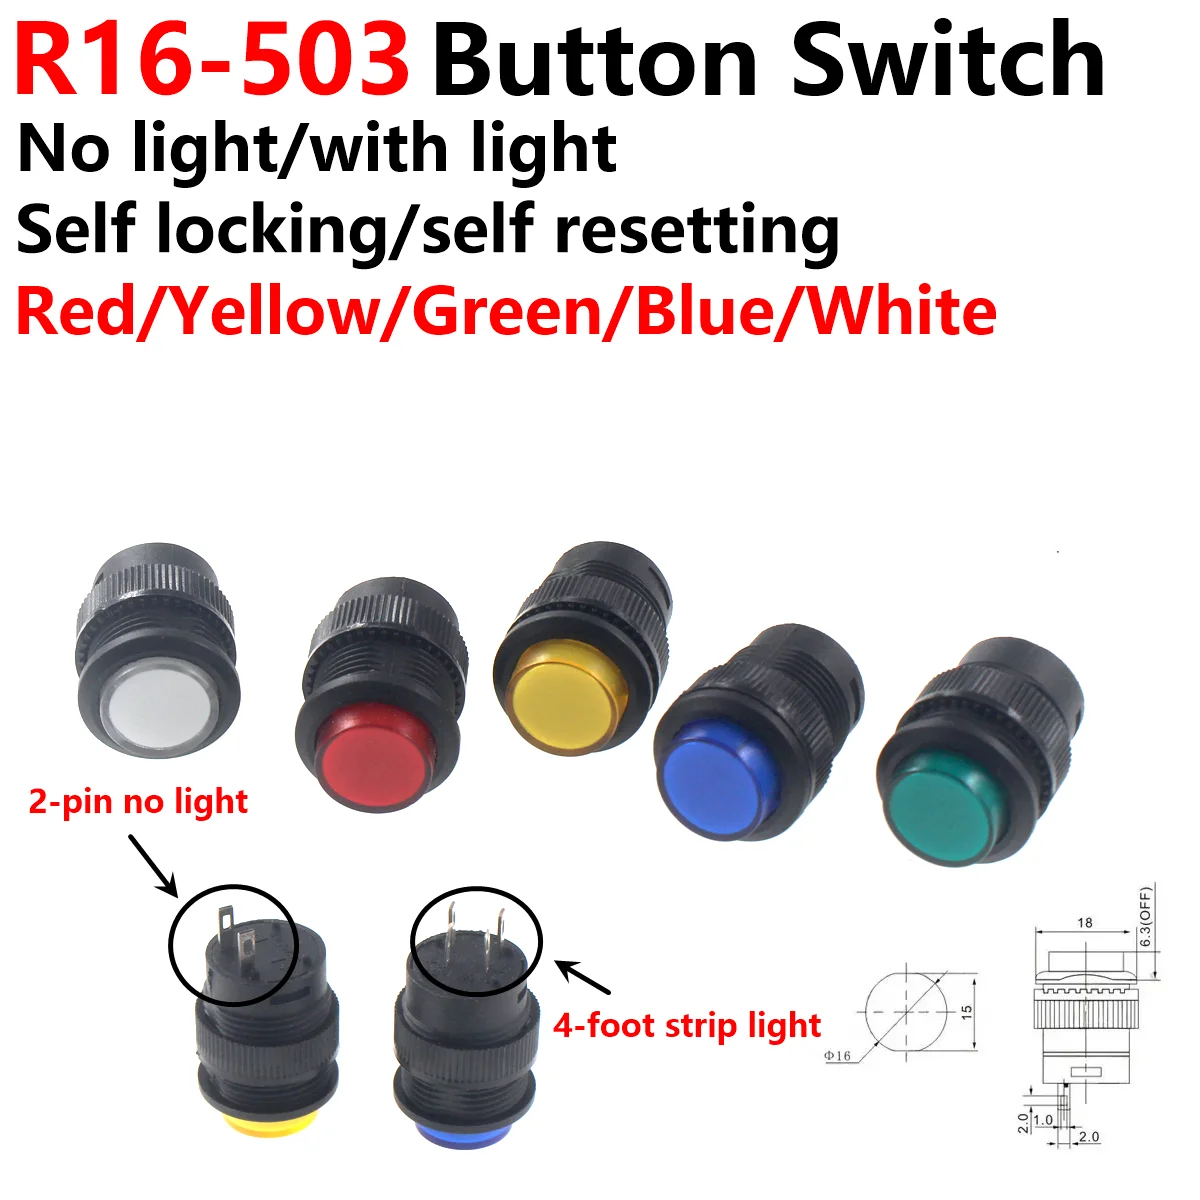 10Pcs R16 Power Switch Button R16-503 Blue Yellow White LED R16-503B R16-503A Latching Reset Button 2P 4P Selflock No Lock Reset